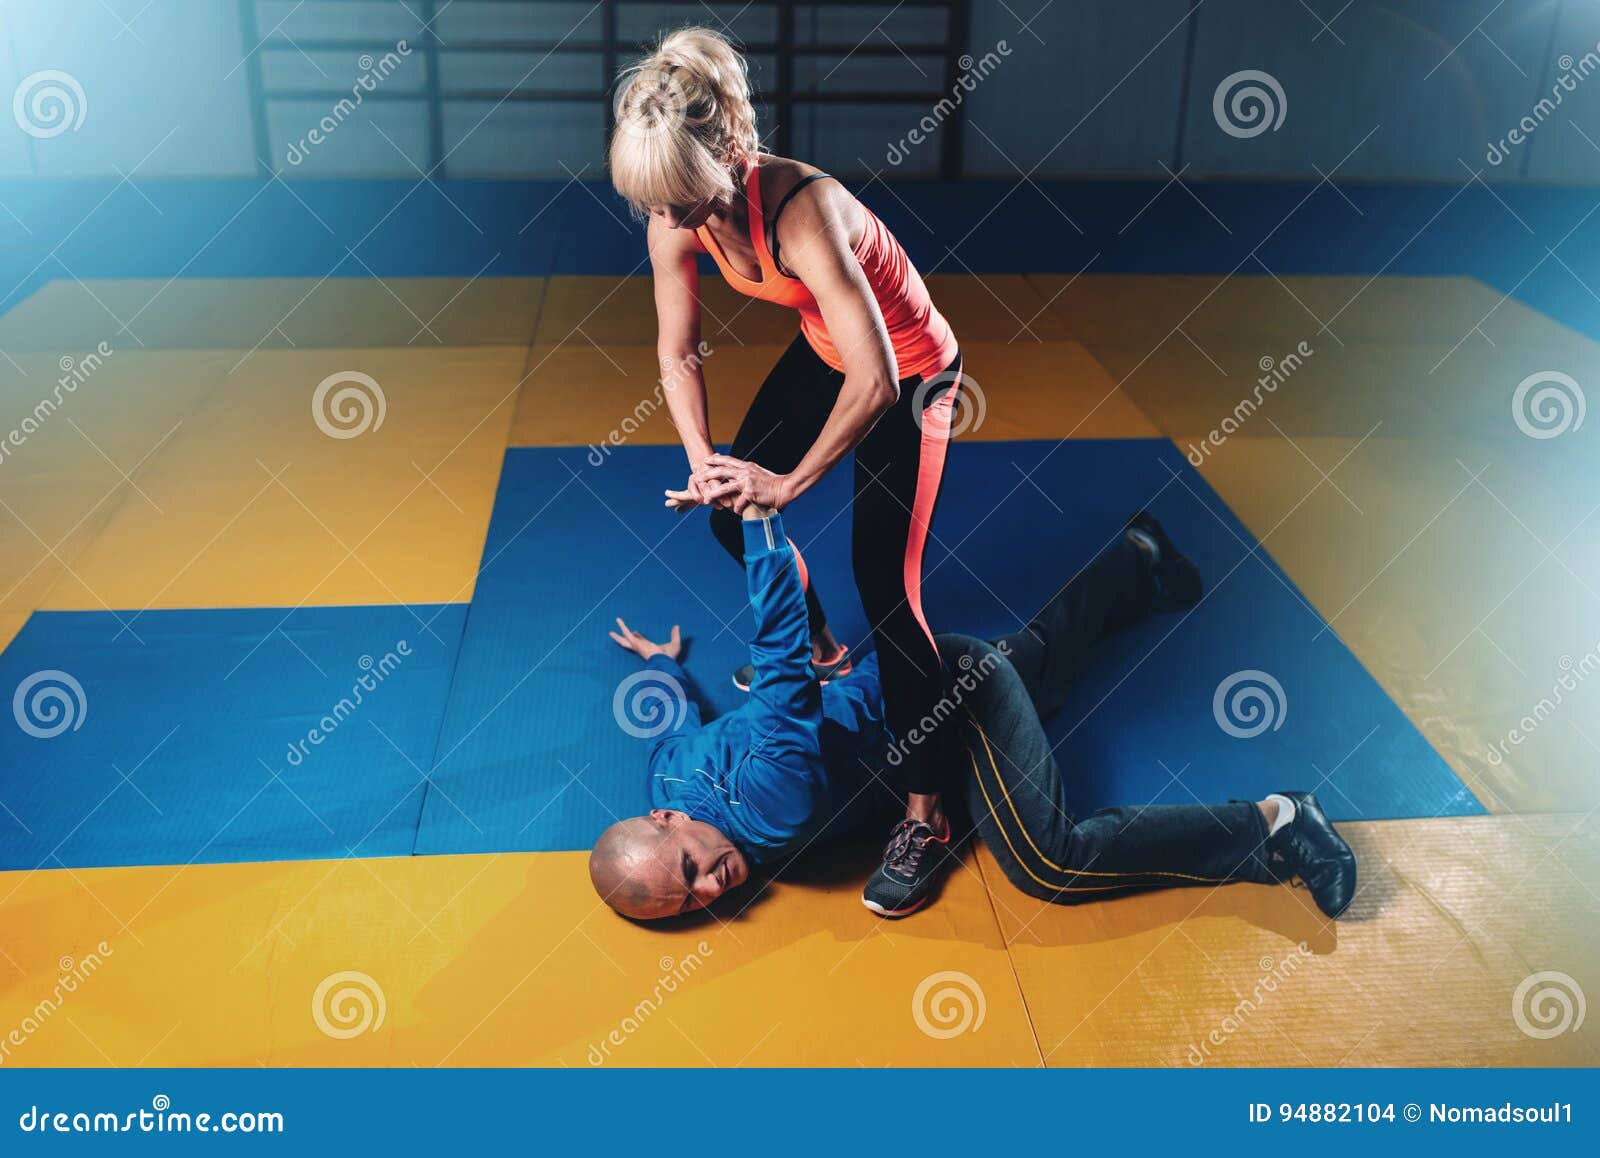 woman fights with man, self-defense technique